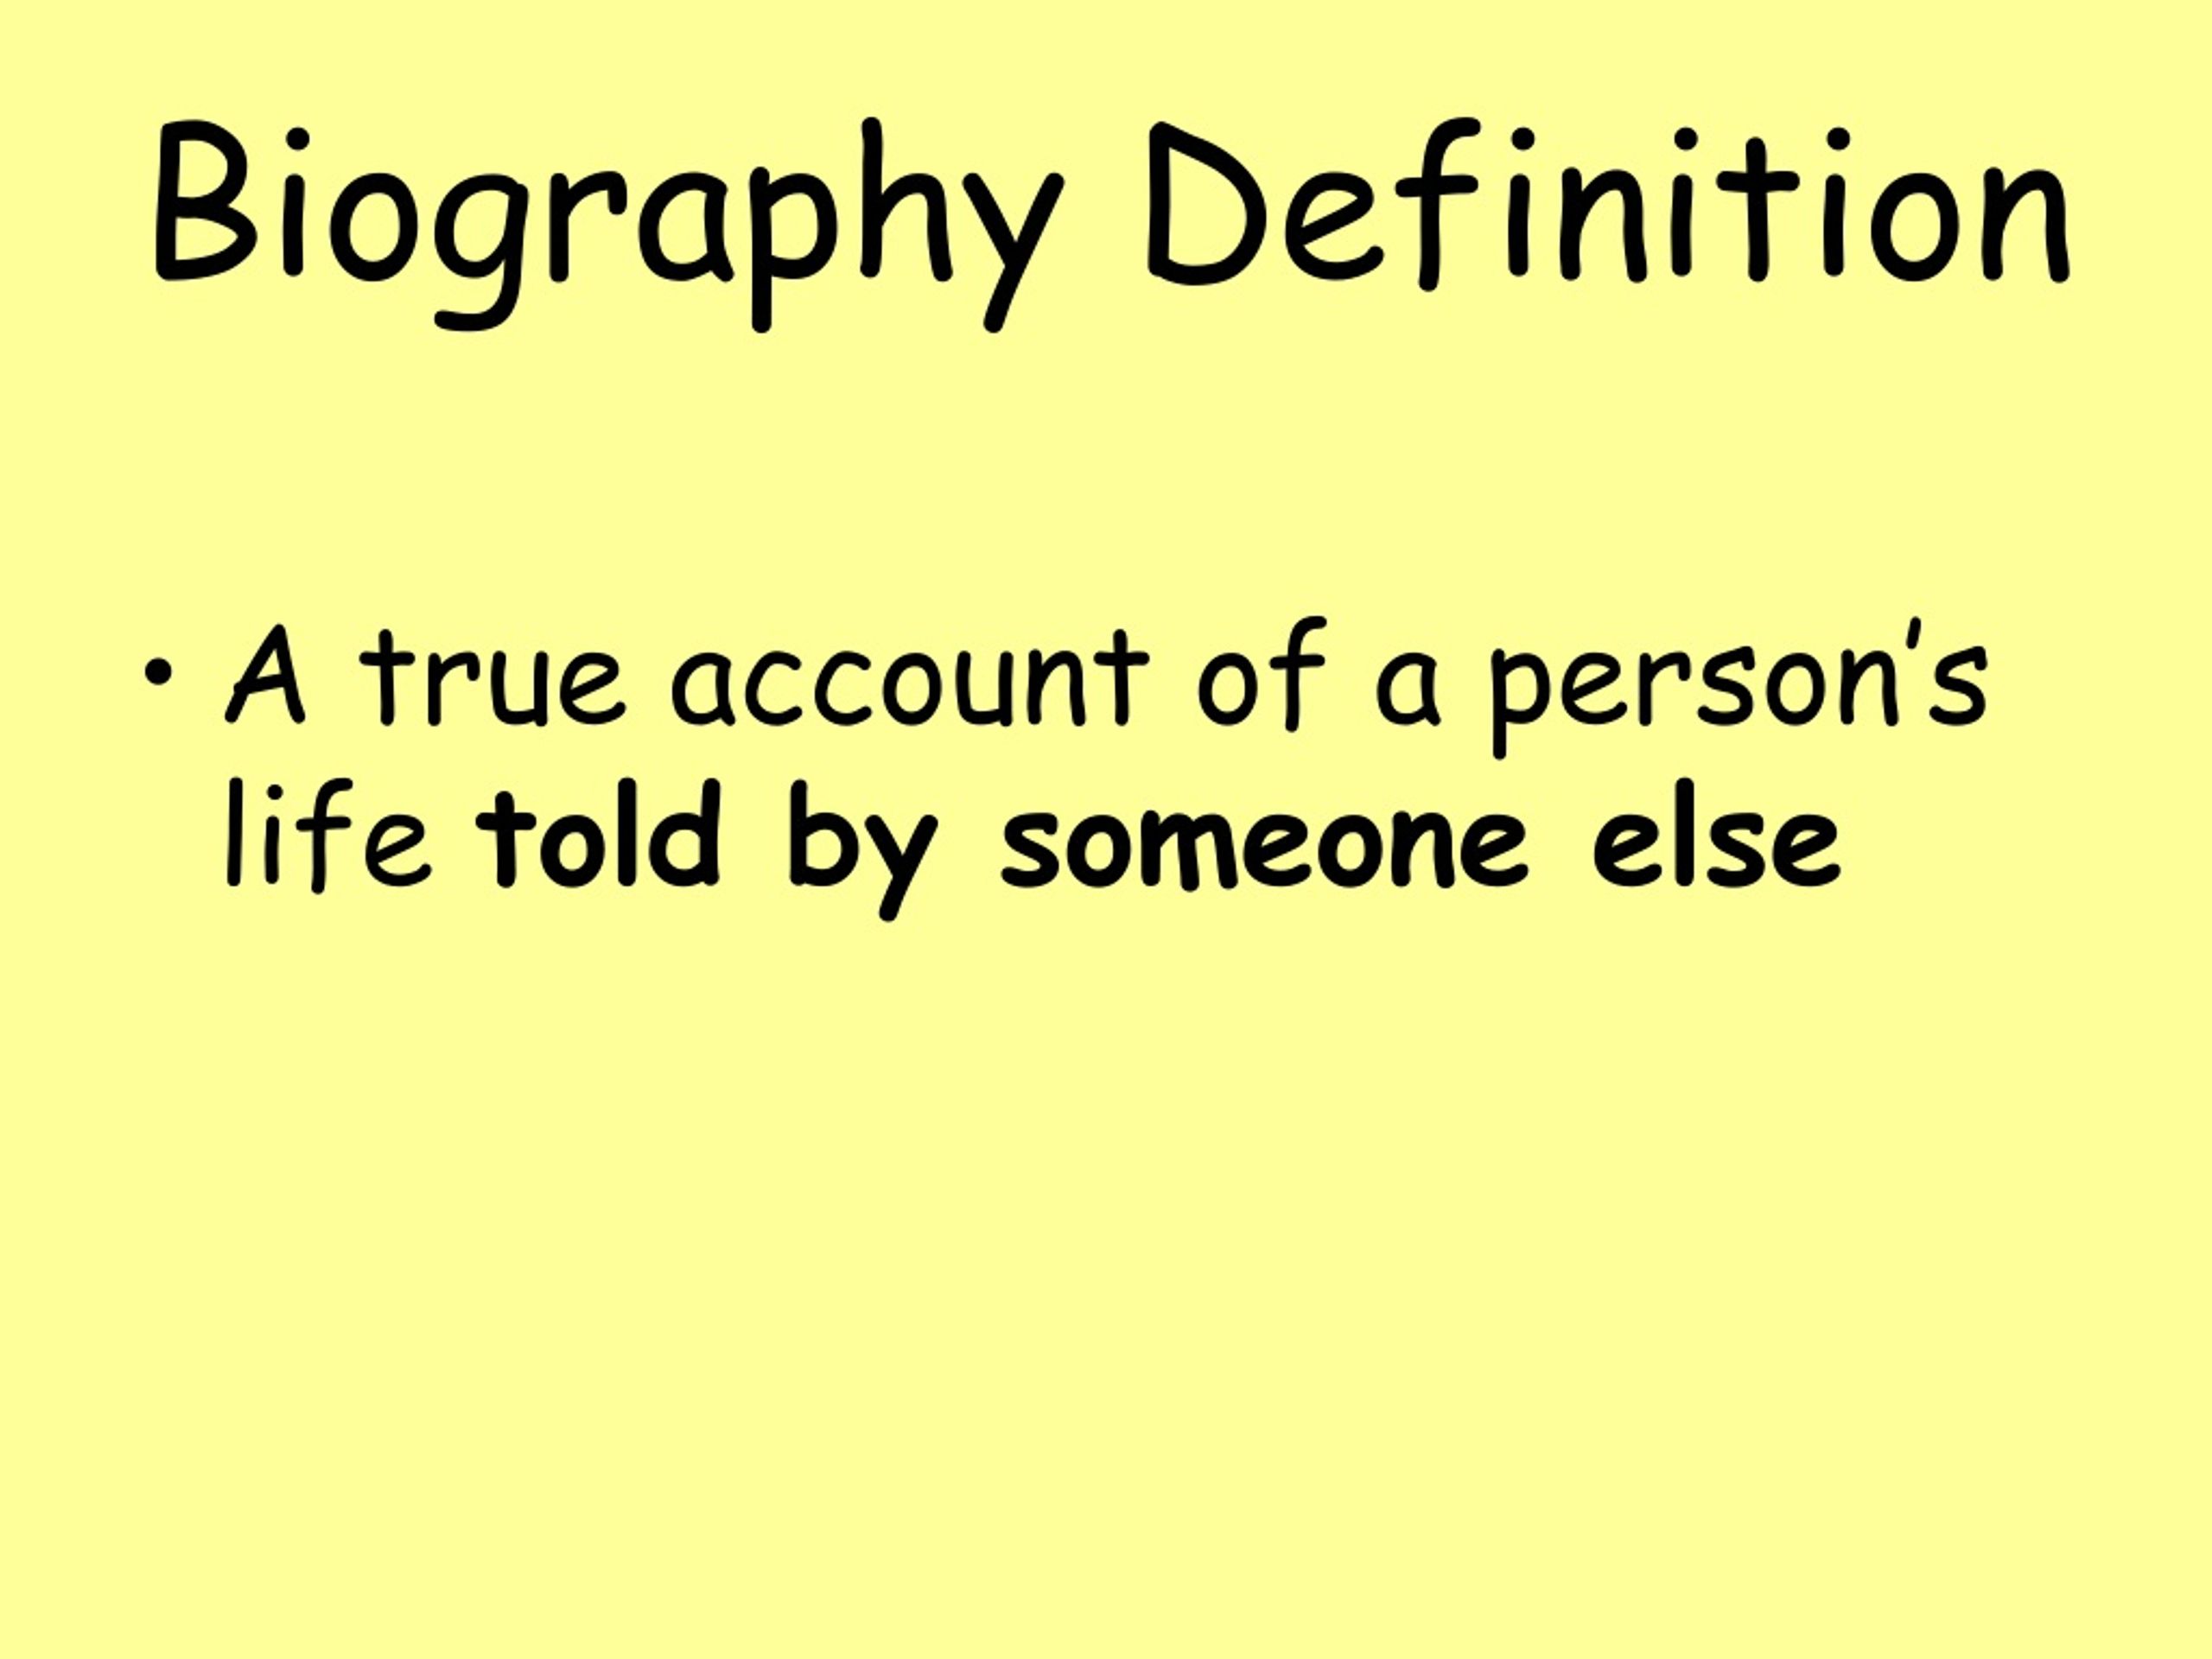 what is the definition of the biography